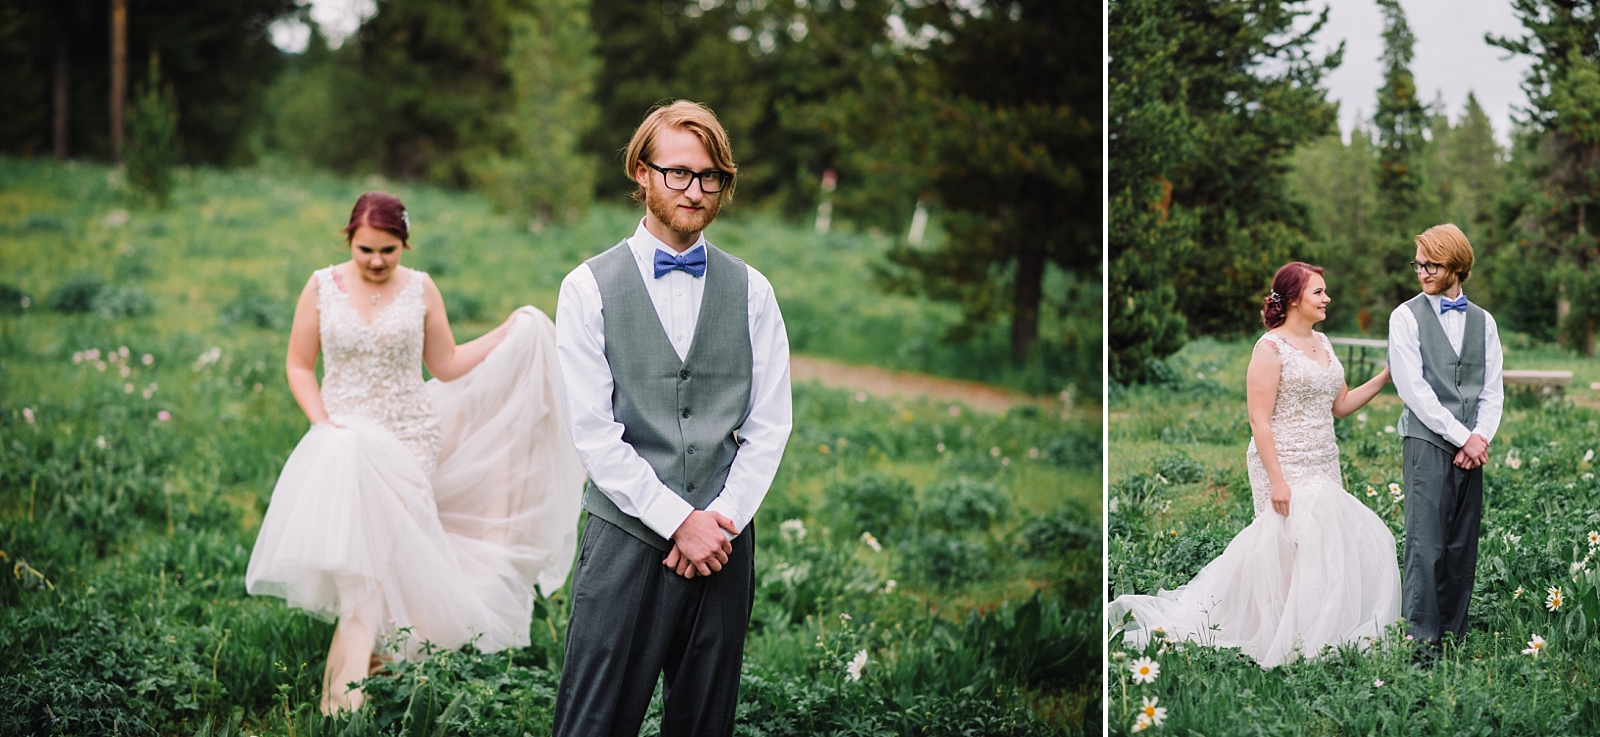 spring meadow bride and groom first look